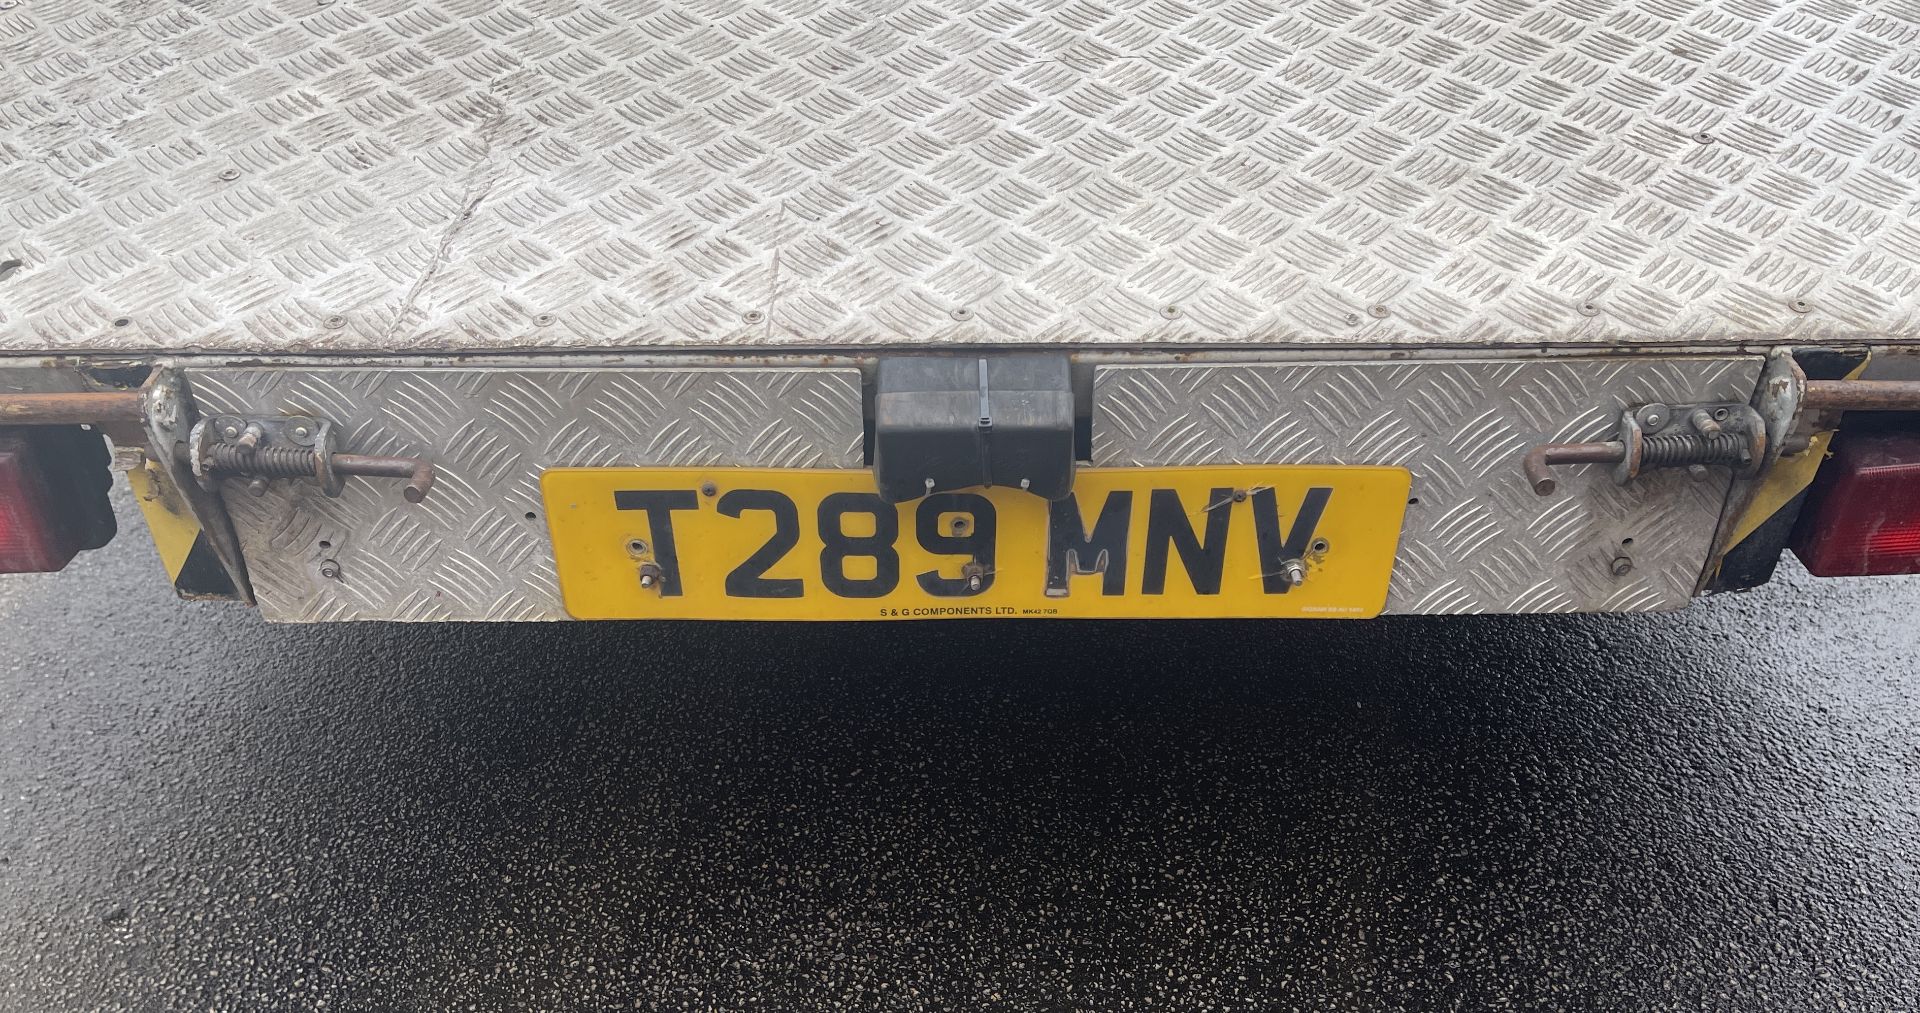 VW LT35 SDI Recovery Vehicle, Registration No. T289 MNV - Image 28 of 64